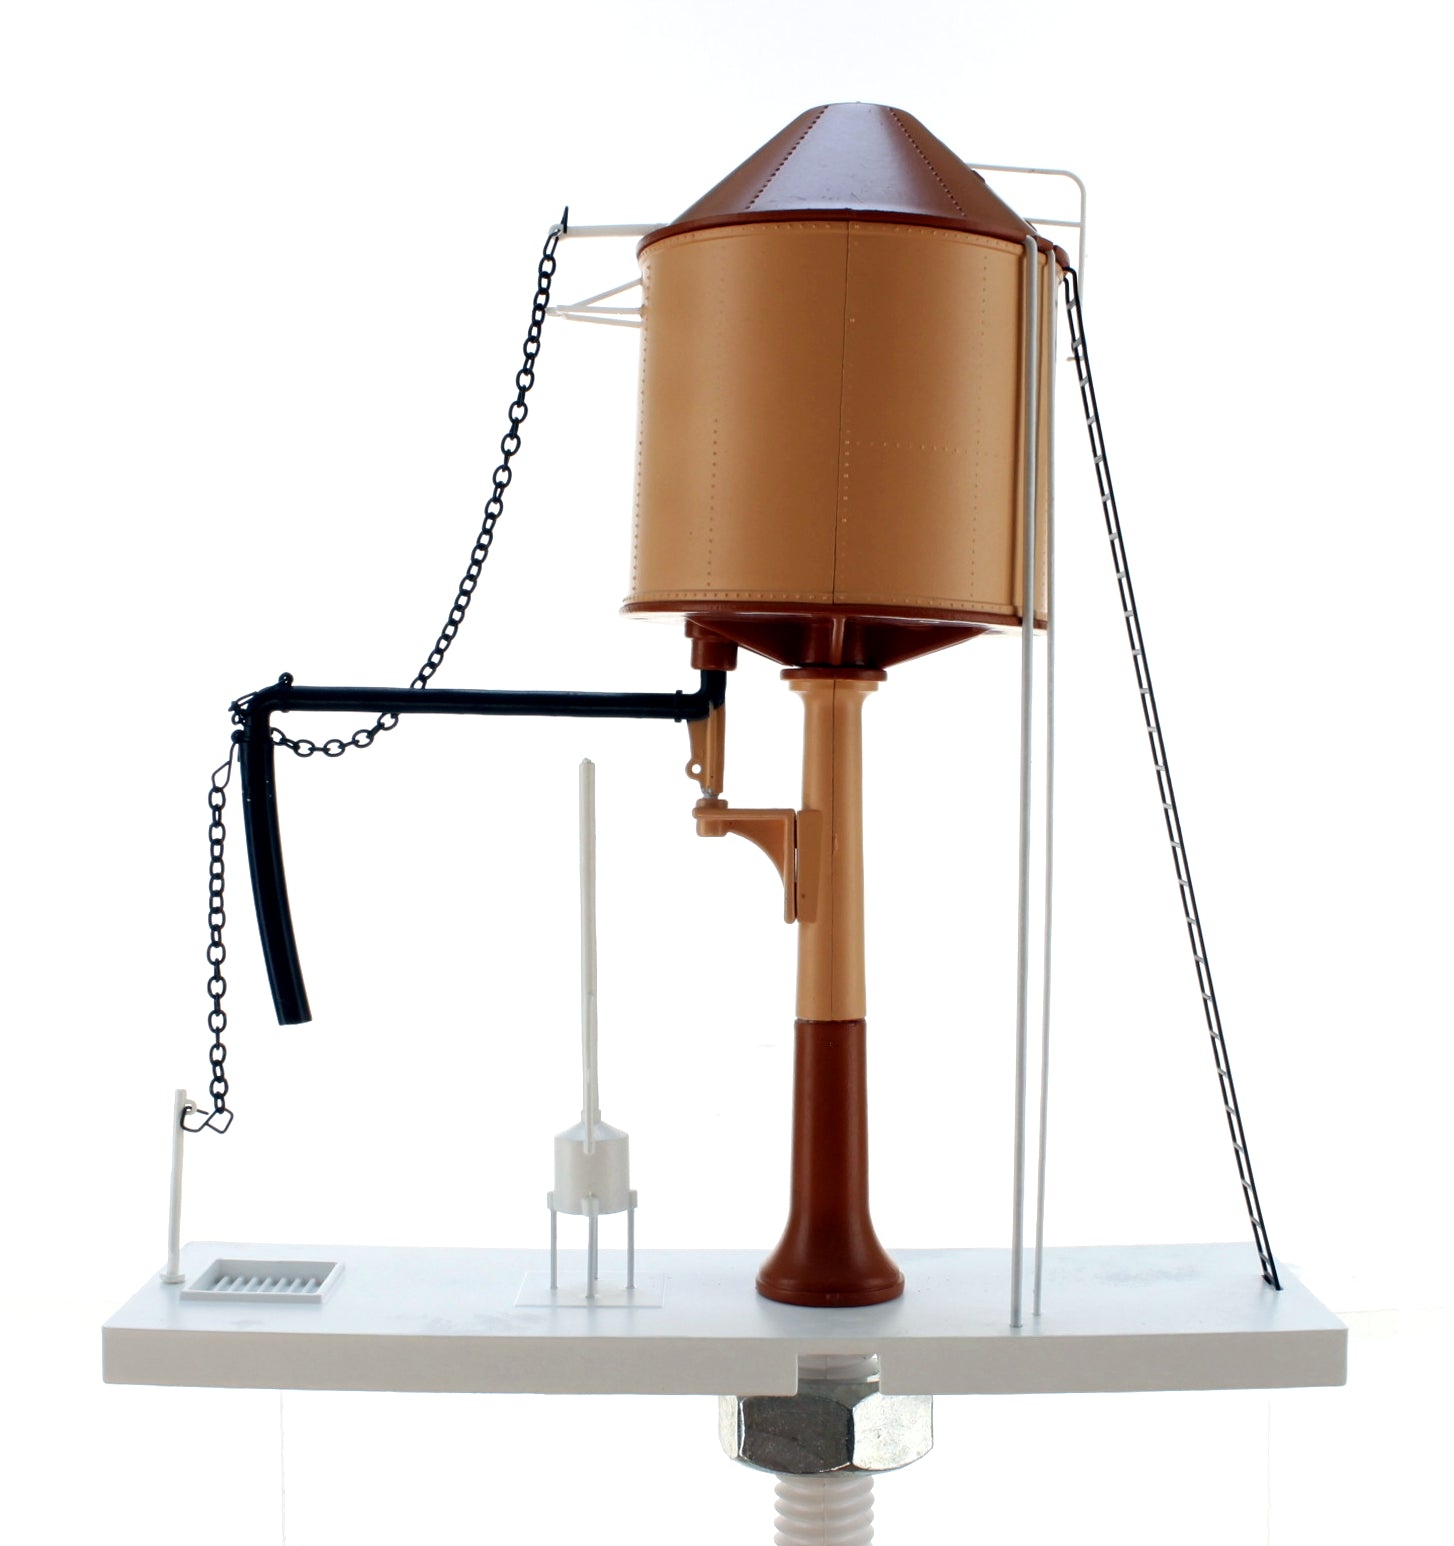 4A-002-004 Water Tower Light & Dark Stone Conical Motorised